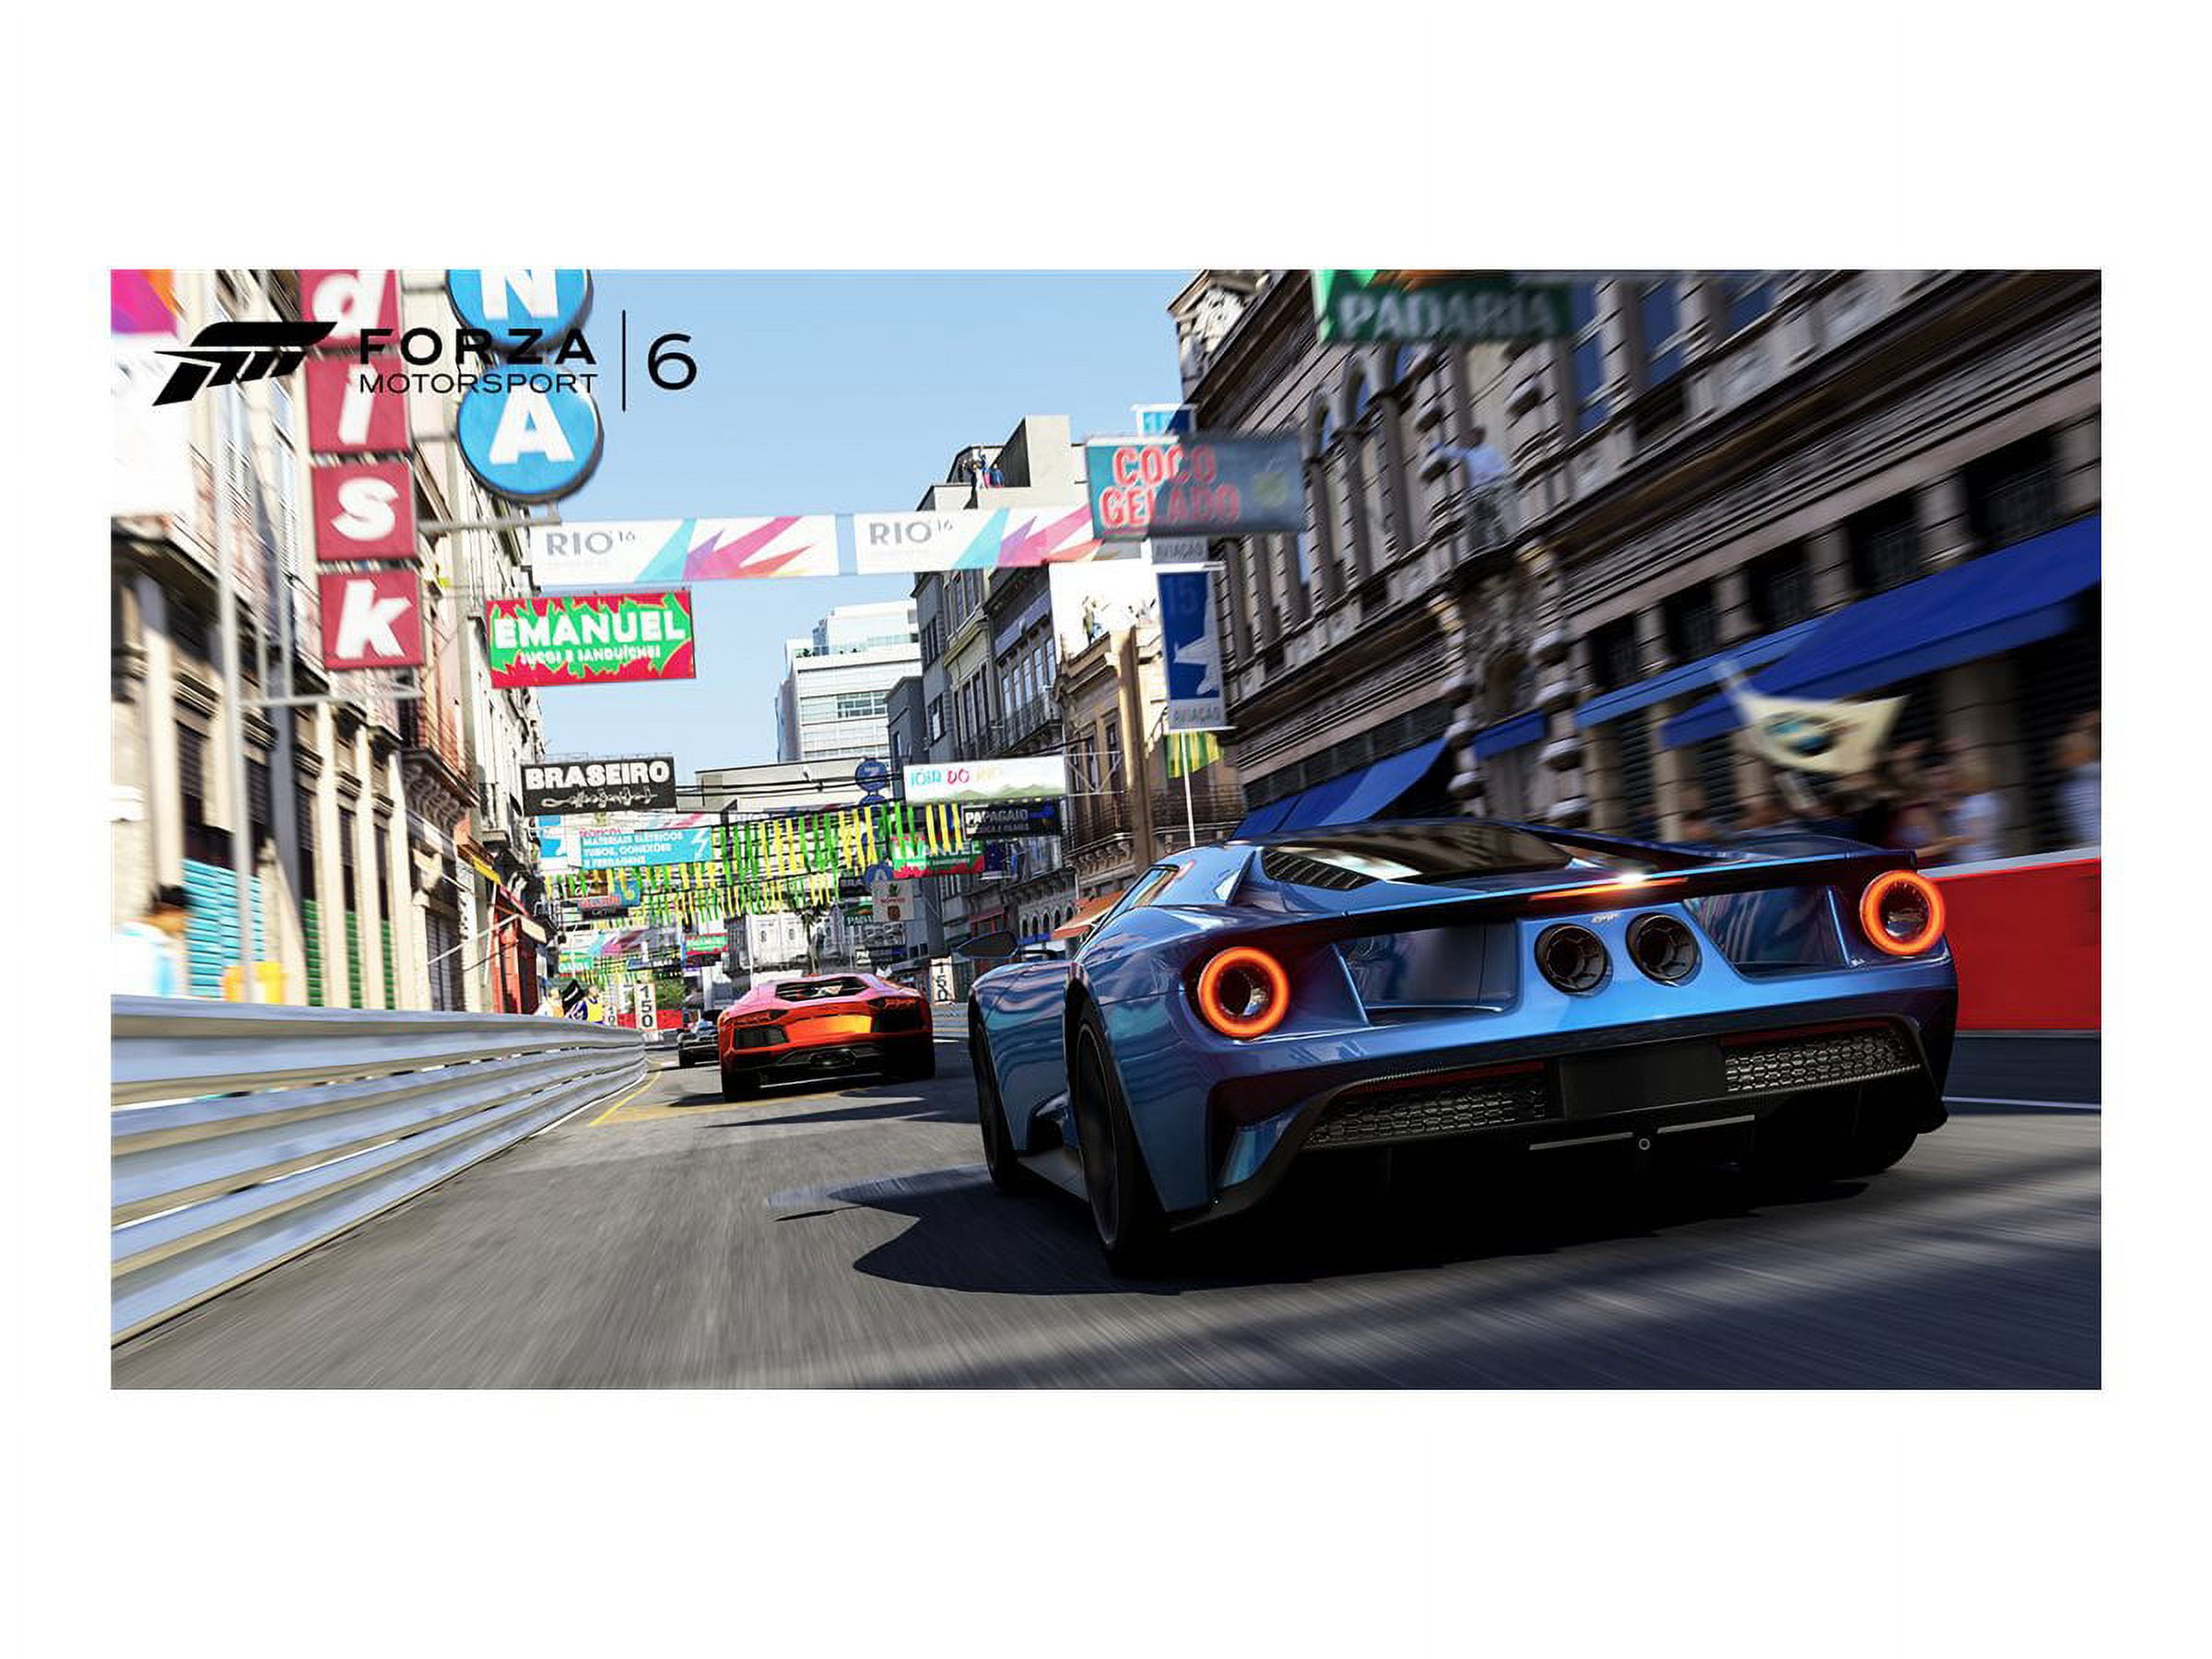 Forza Motorsport 6 will be pulled from the Xbox Store on 15th September -  Team VVV